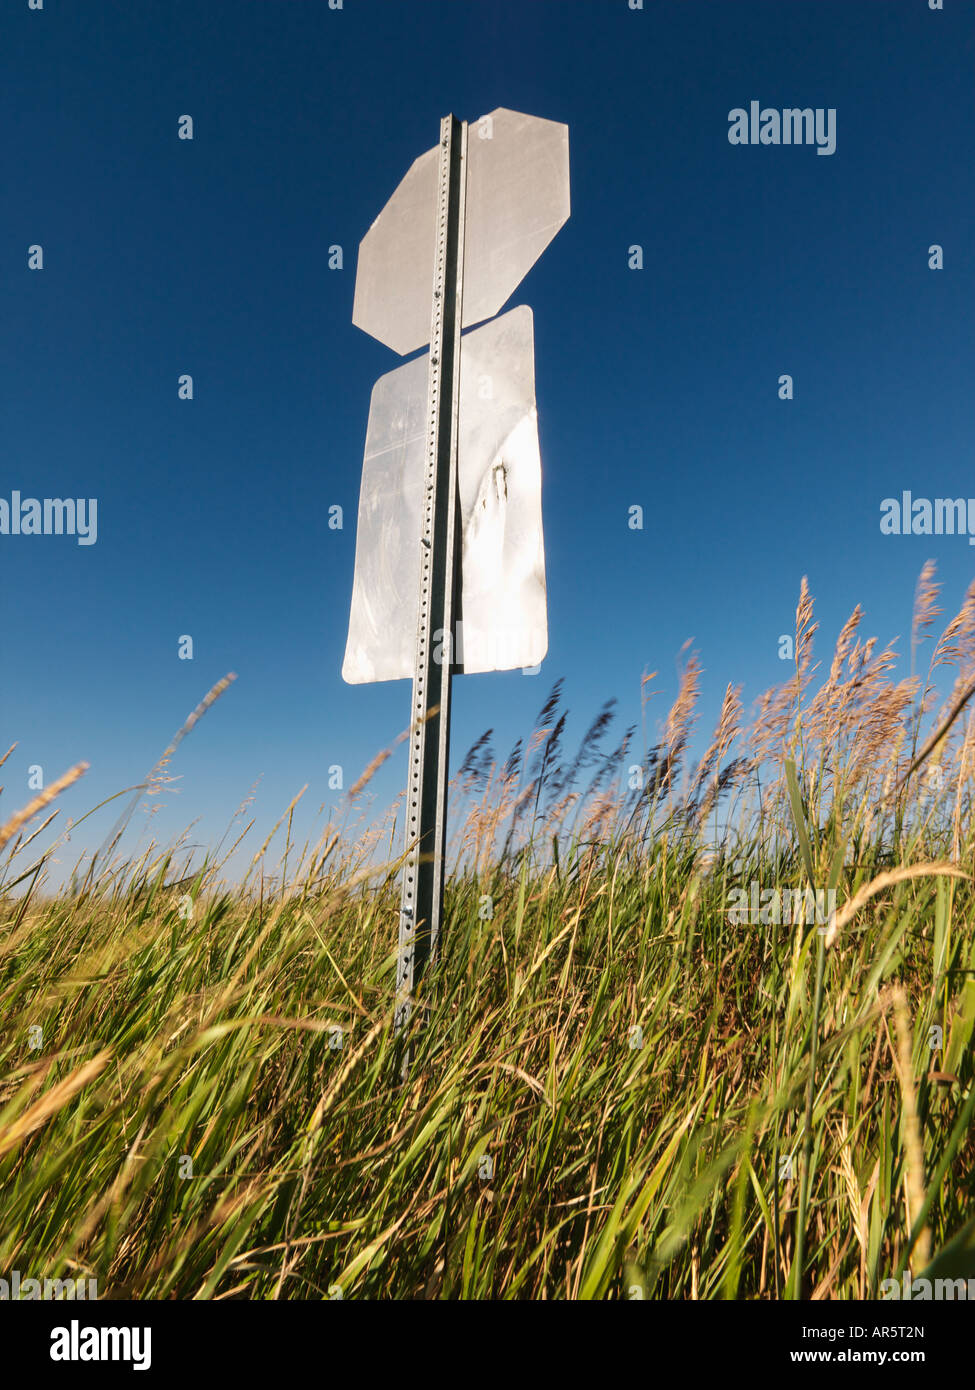 Back view of road sign in rural country Stock Photo